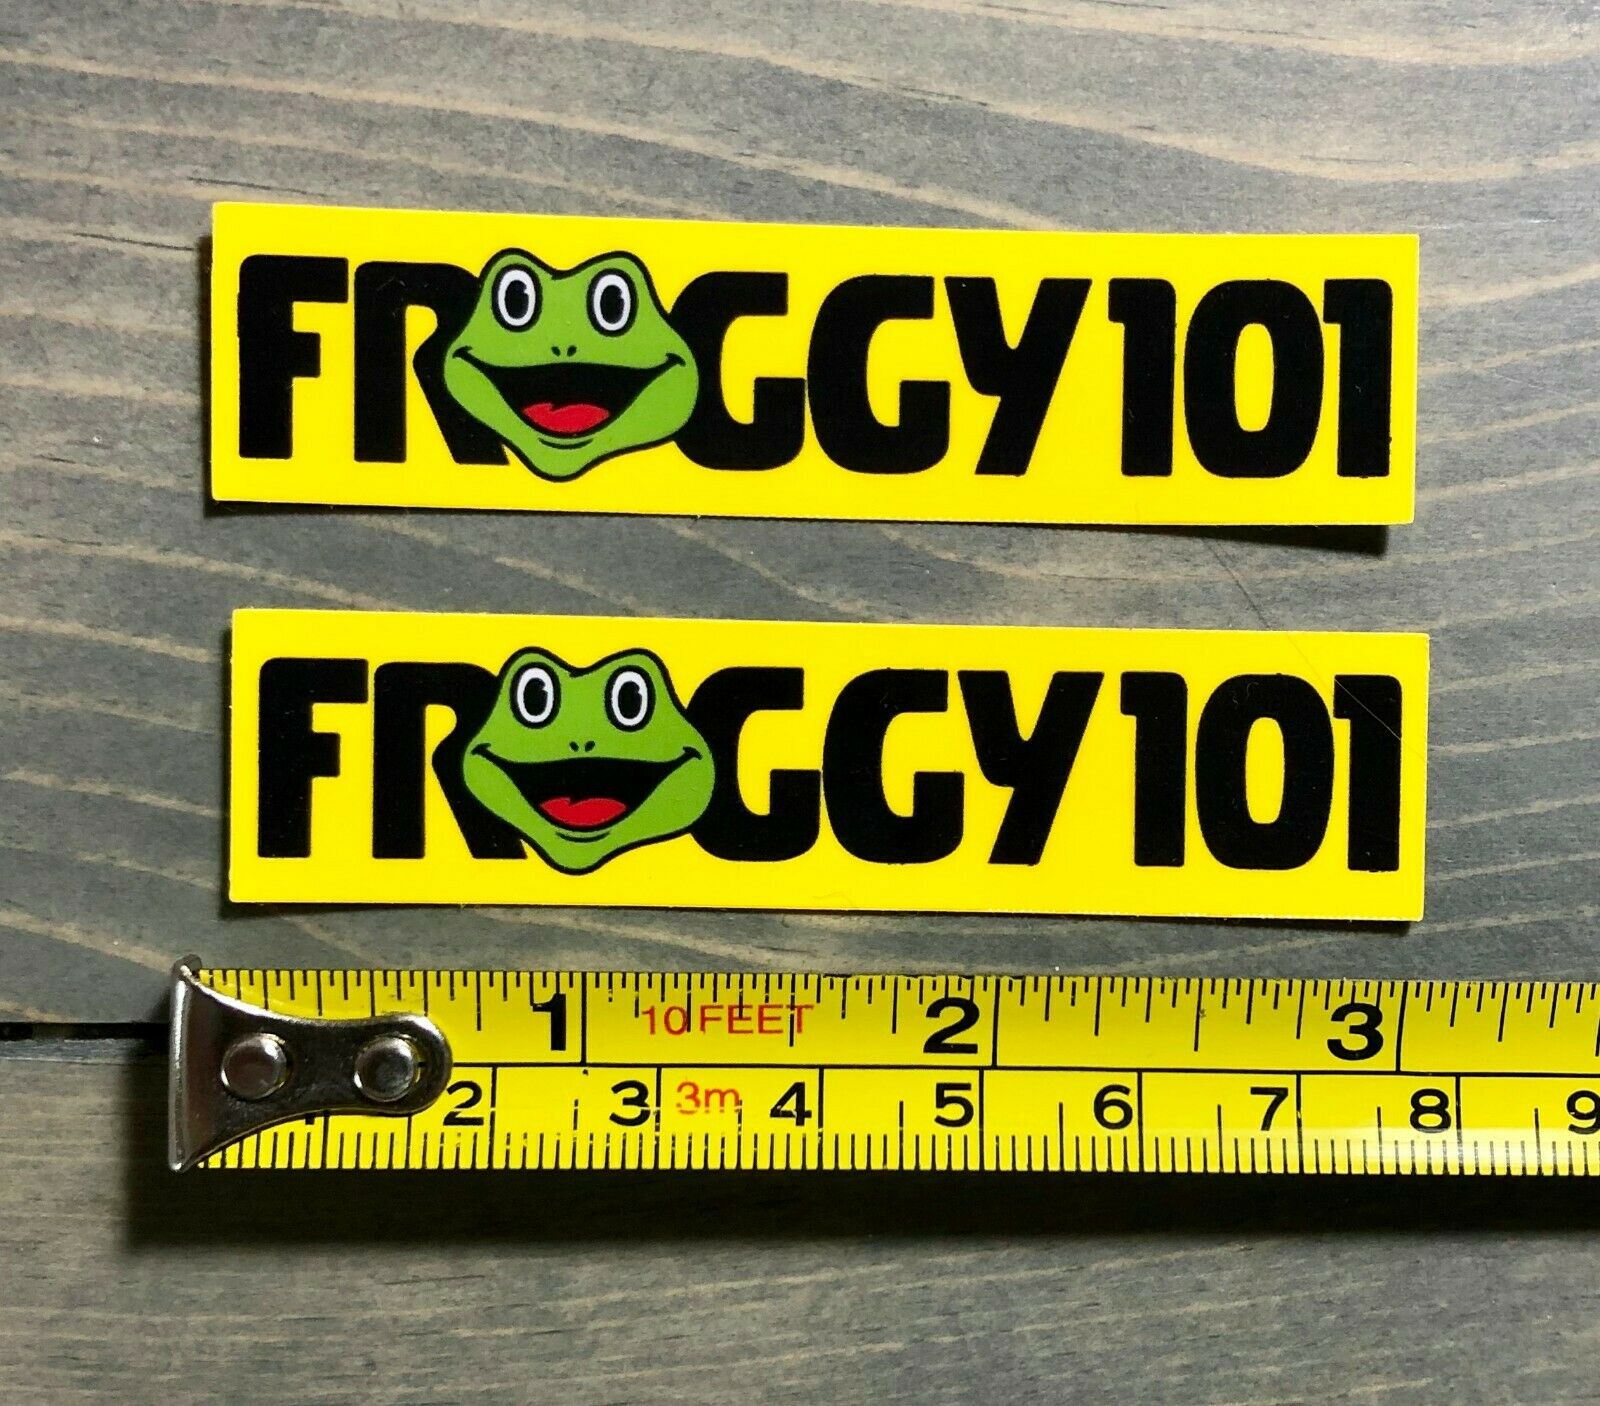 2 Froggy 101 Sticker Small Decal 3" The Office Dwight Schrute Michael Scott Po